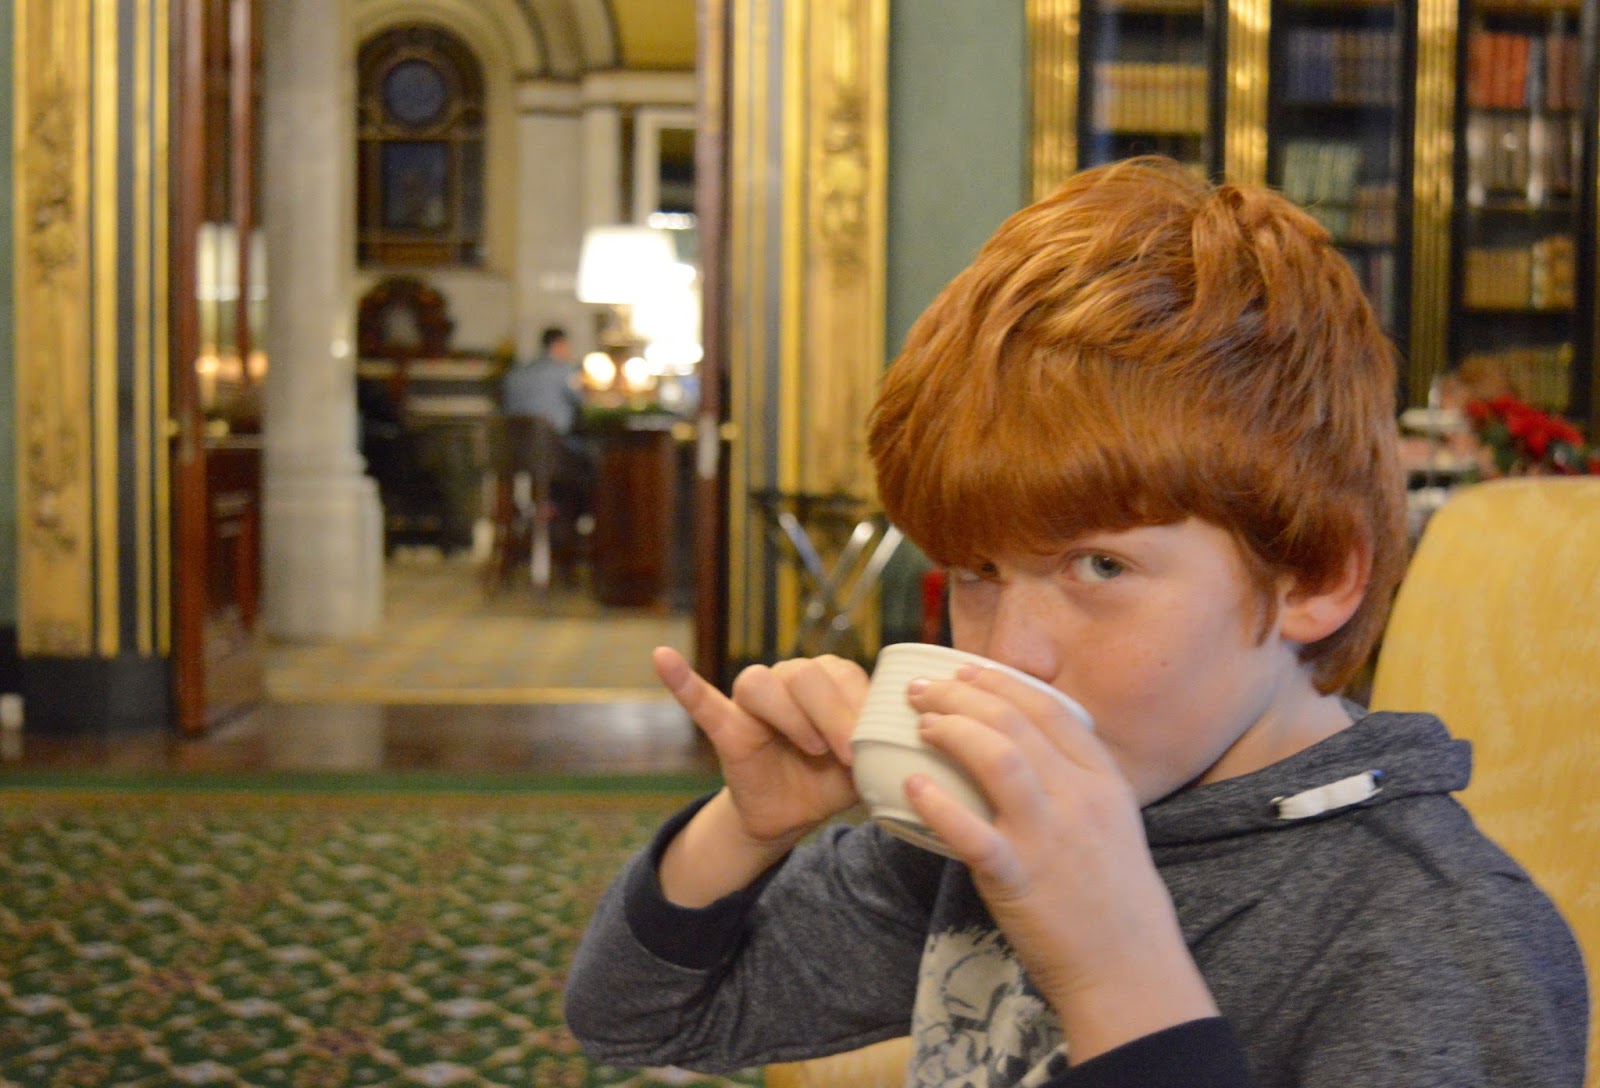 Afternoon tea at Wynyard Hall (with kids) - A Review